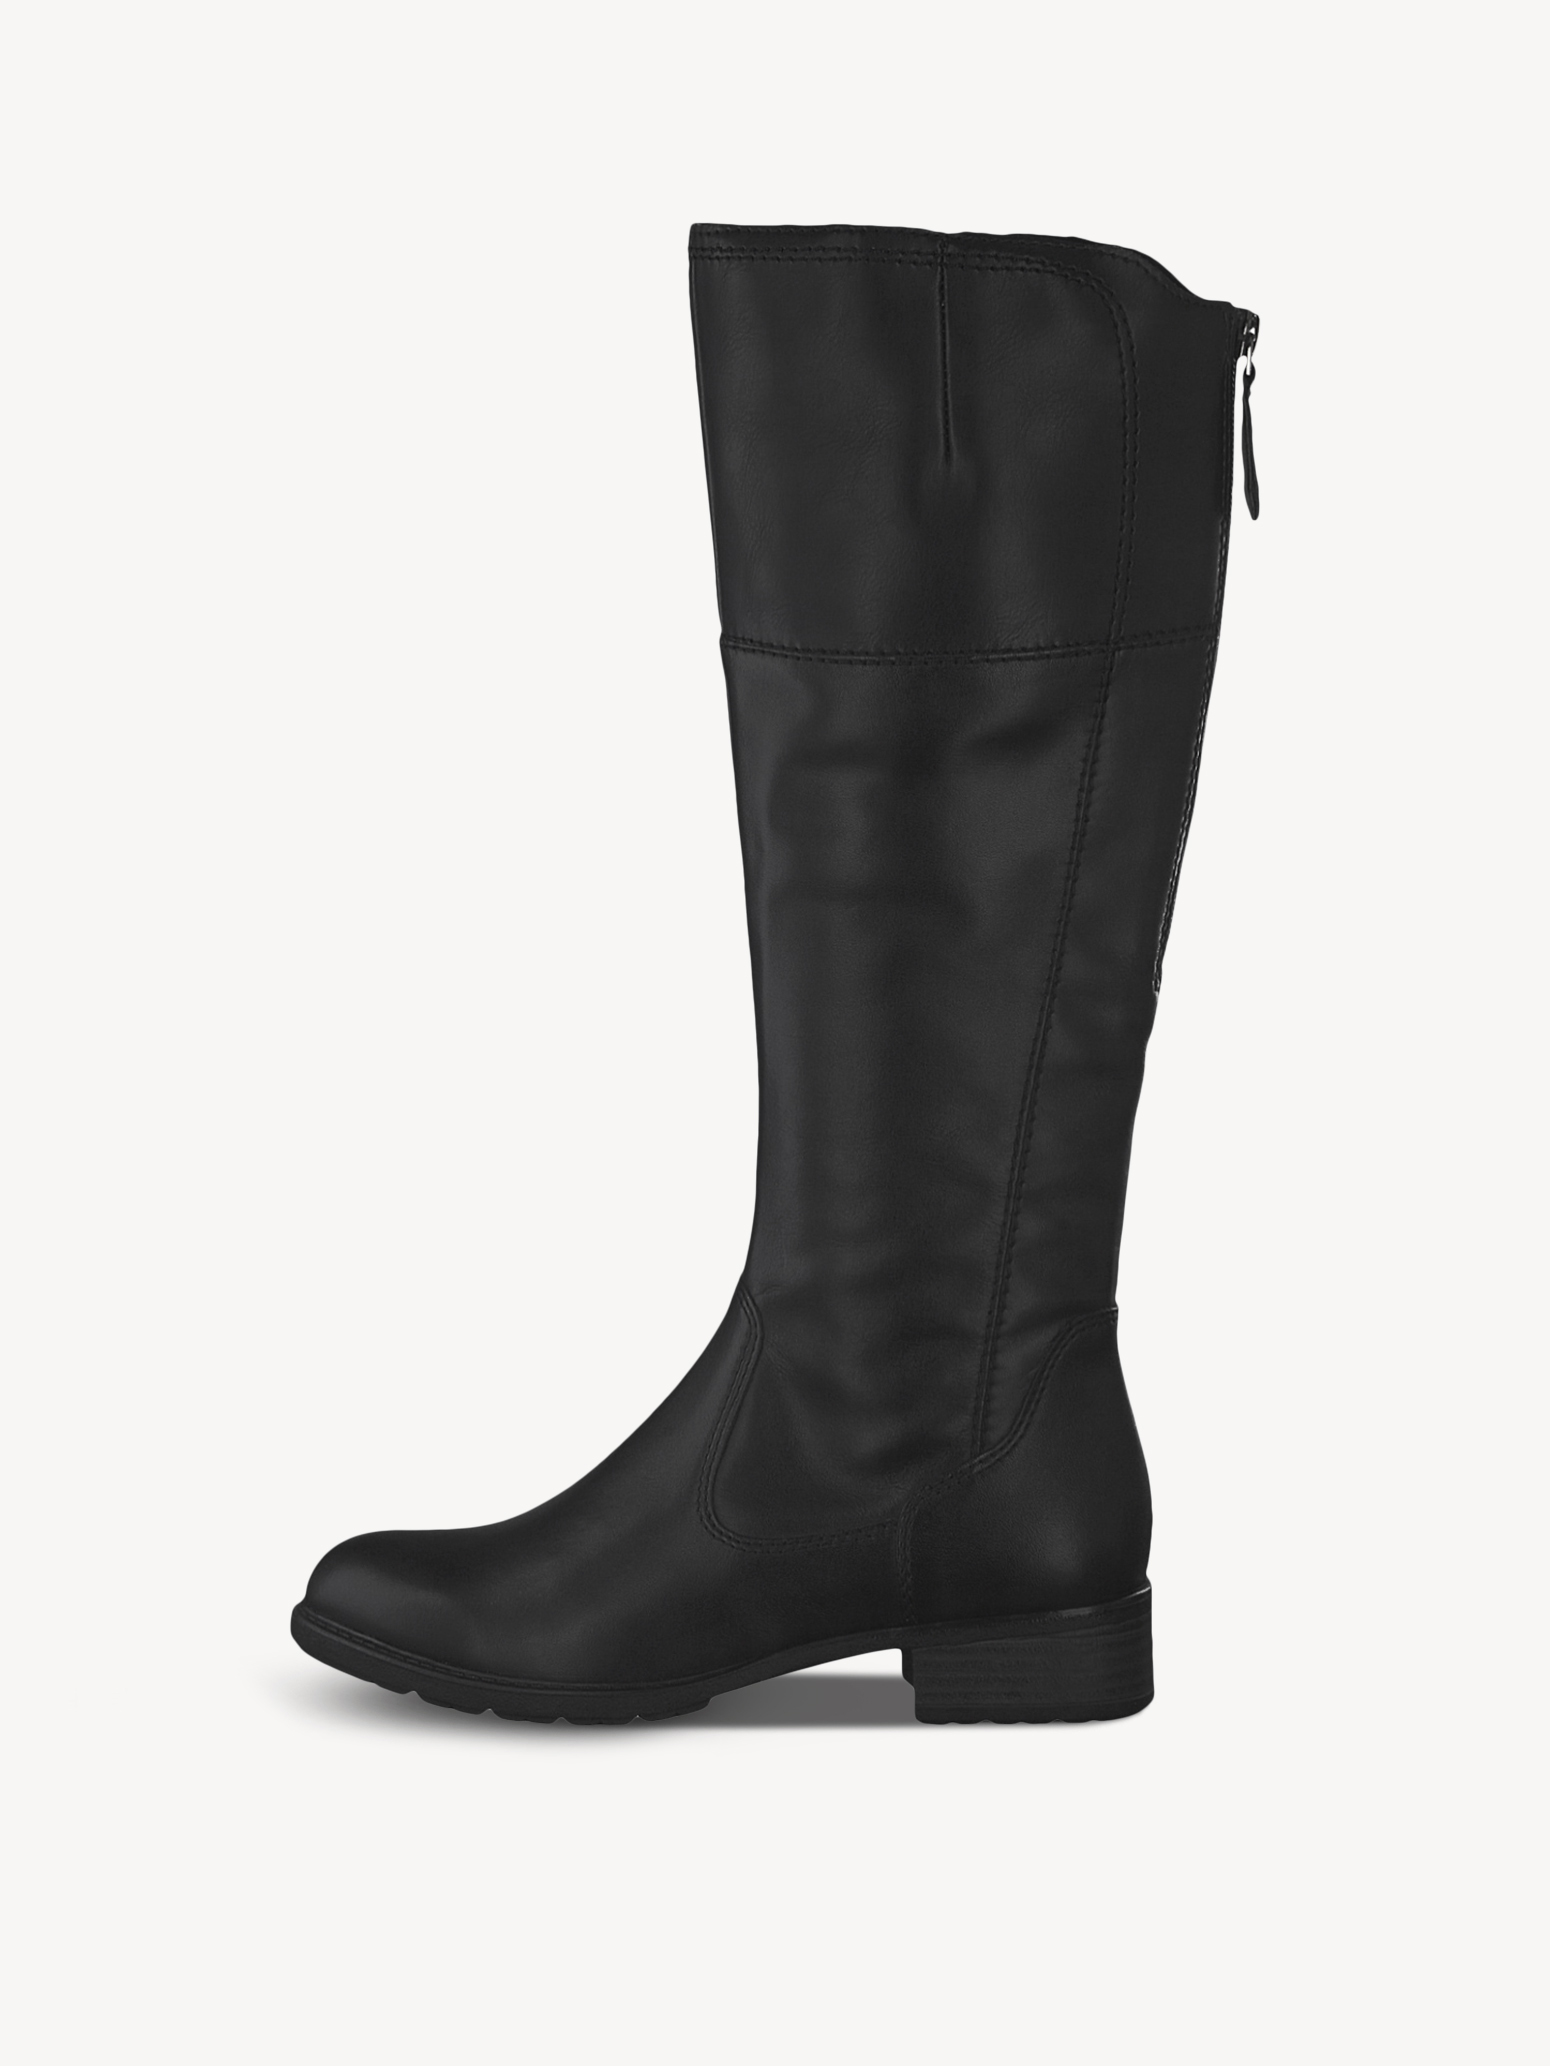 Leather Boots Buy Tamaris Boots online!